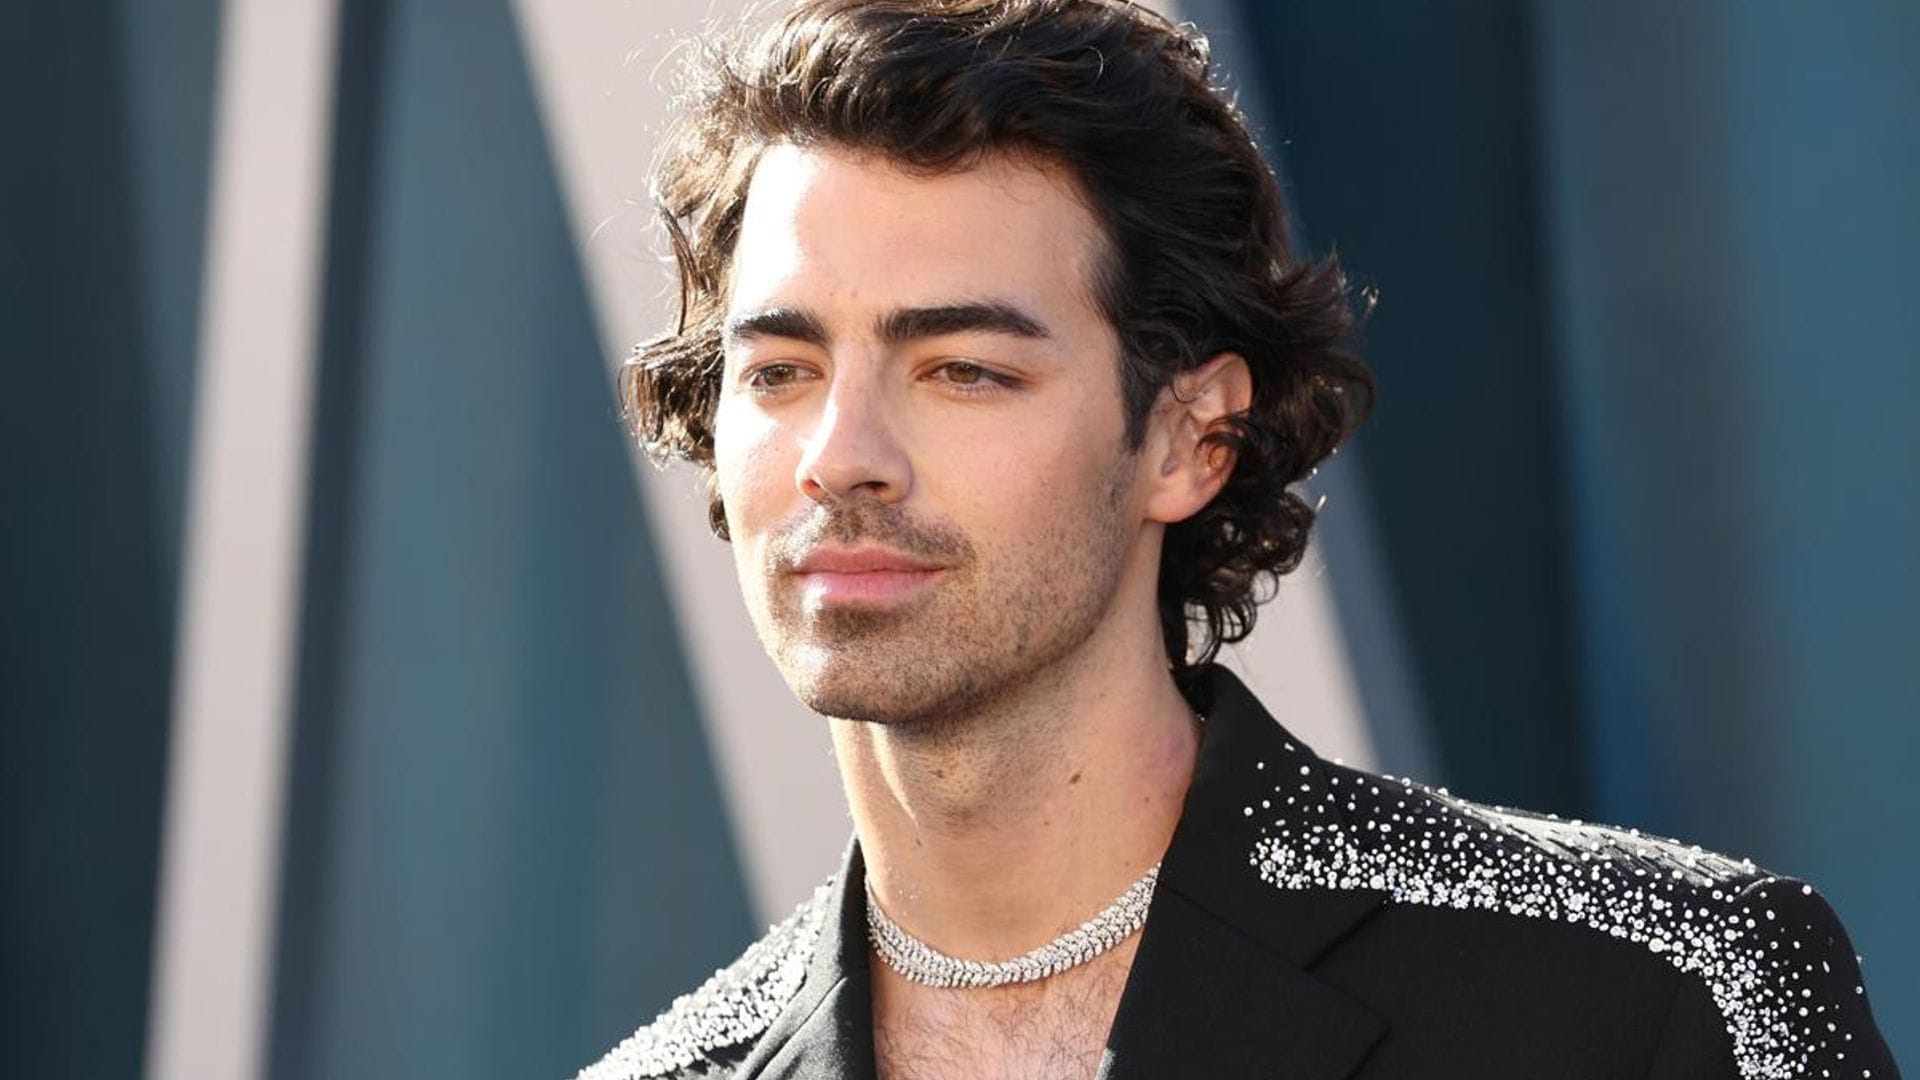 Joe Jonas opens up about using injectables on his face: ‘I felt comfortable’